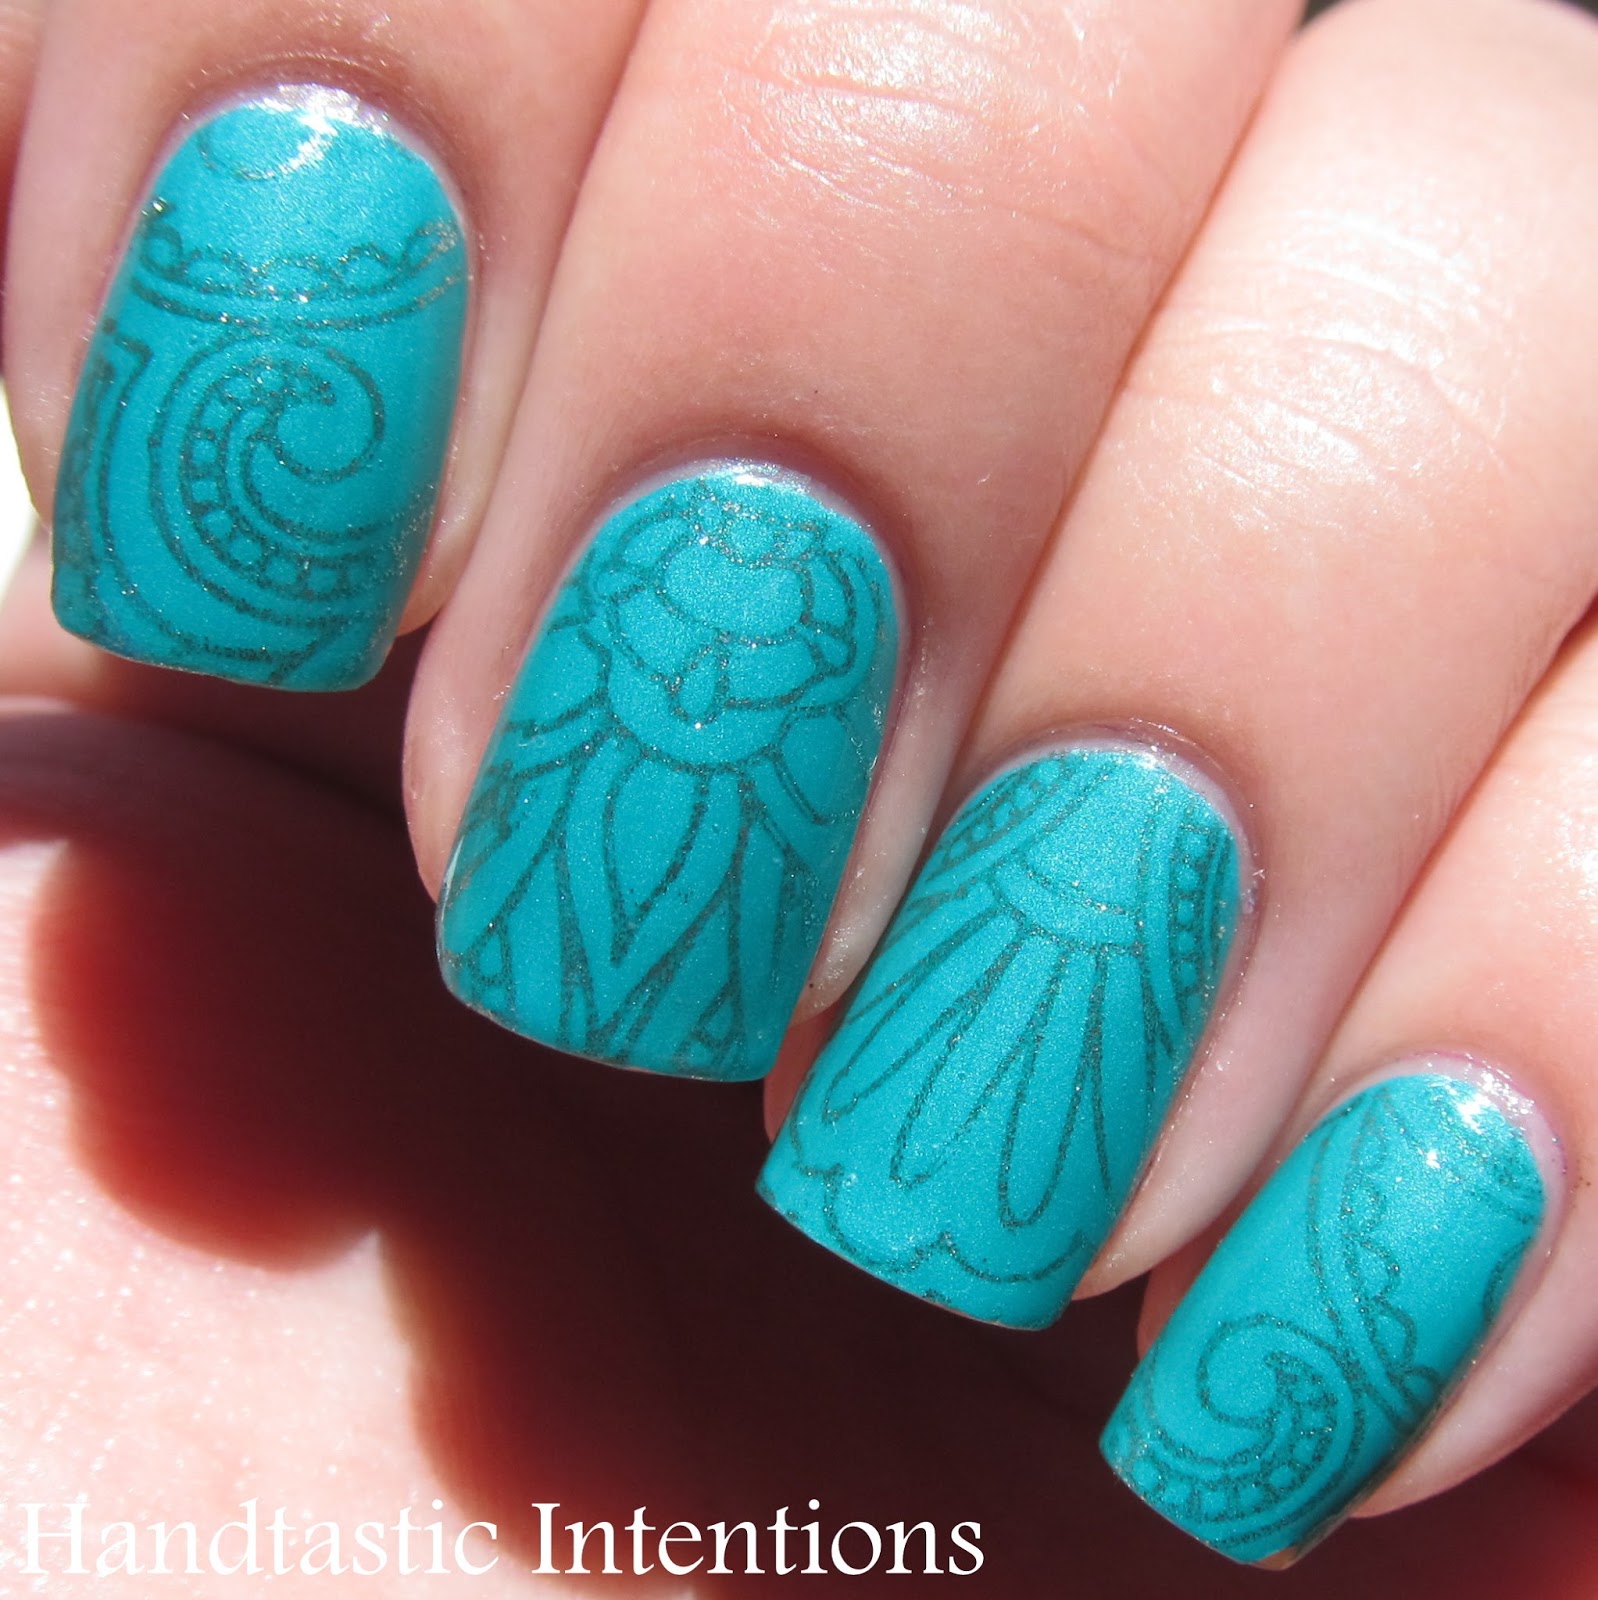 Handtastic Intentions: Nail Art: Turquoise Stamping